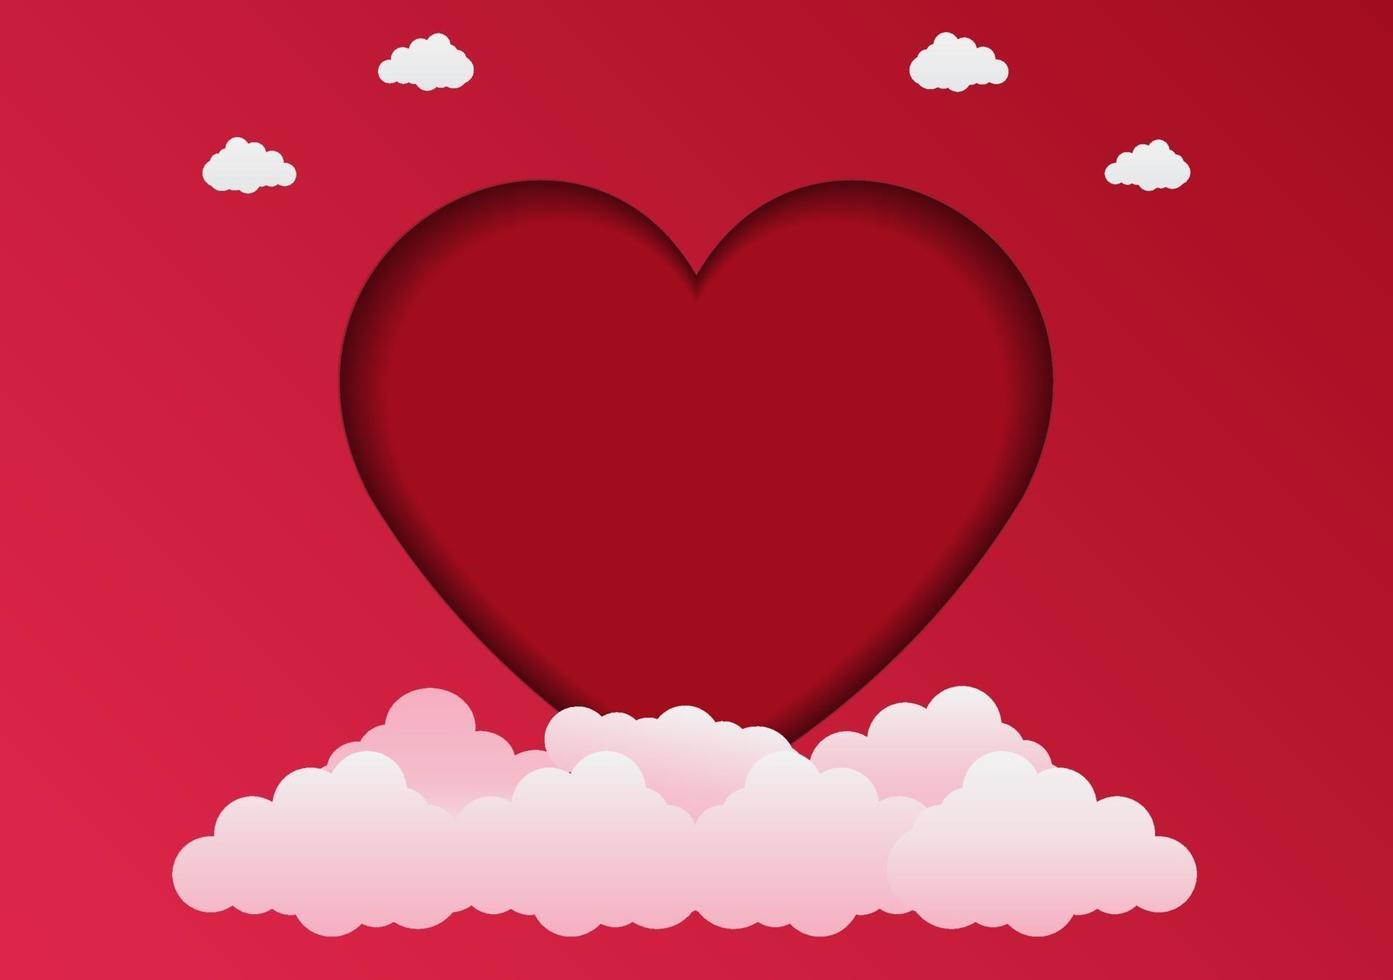 Valentine's day card in a heart frame,paper art style.vector illustrator vector